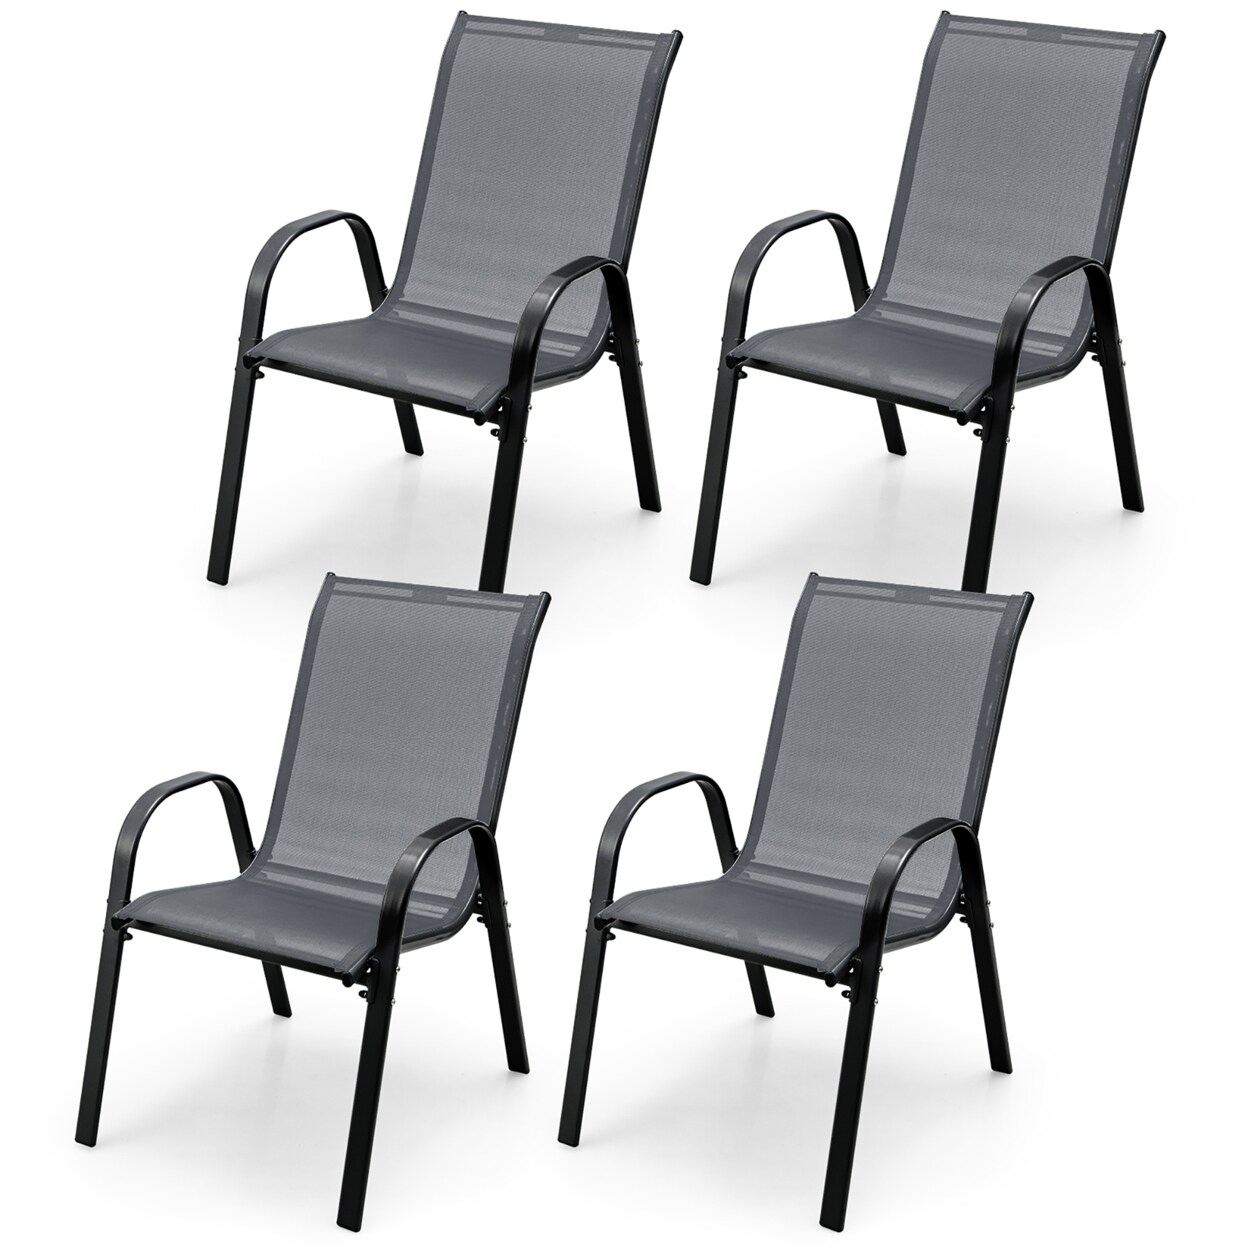 Gymax 4PCS Patio Stacking Dining Chairs w/ Curved Armrests and Breathable Seat Fabric Grey